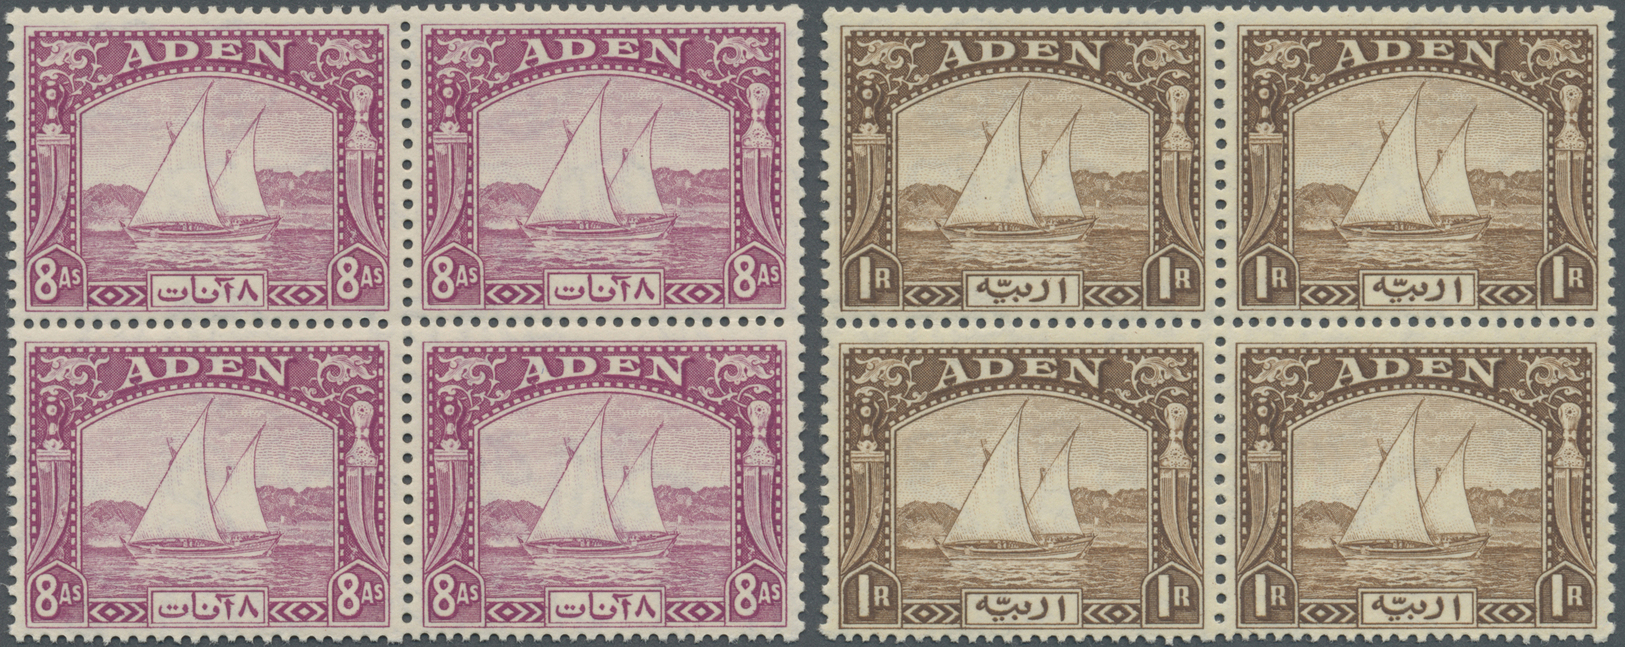 ** Aden: 1937, Dhow Definitives 3a. Carmine, 3½a. Grey-blue, 8a. Pale Purple And 1r. Brown All In Blocks Of Four, Mint N - Yemen